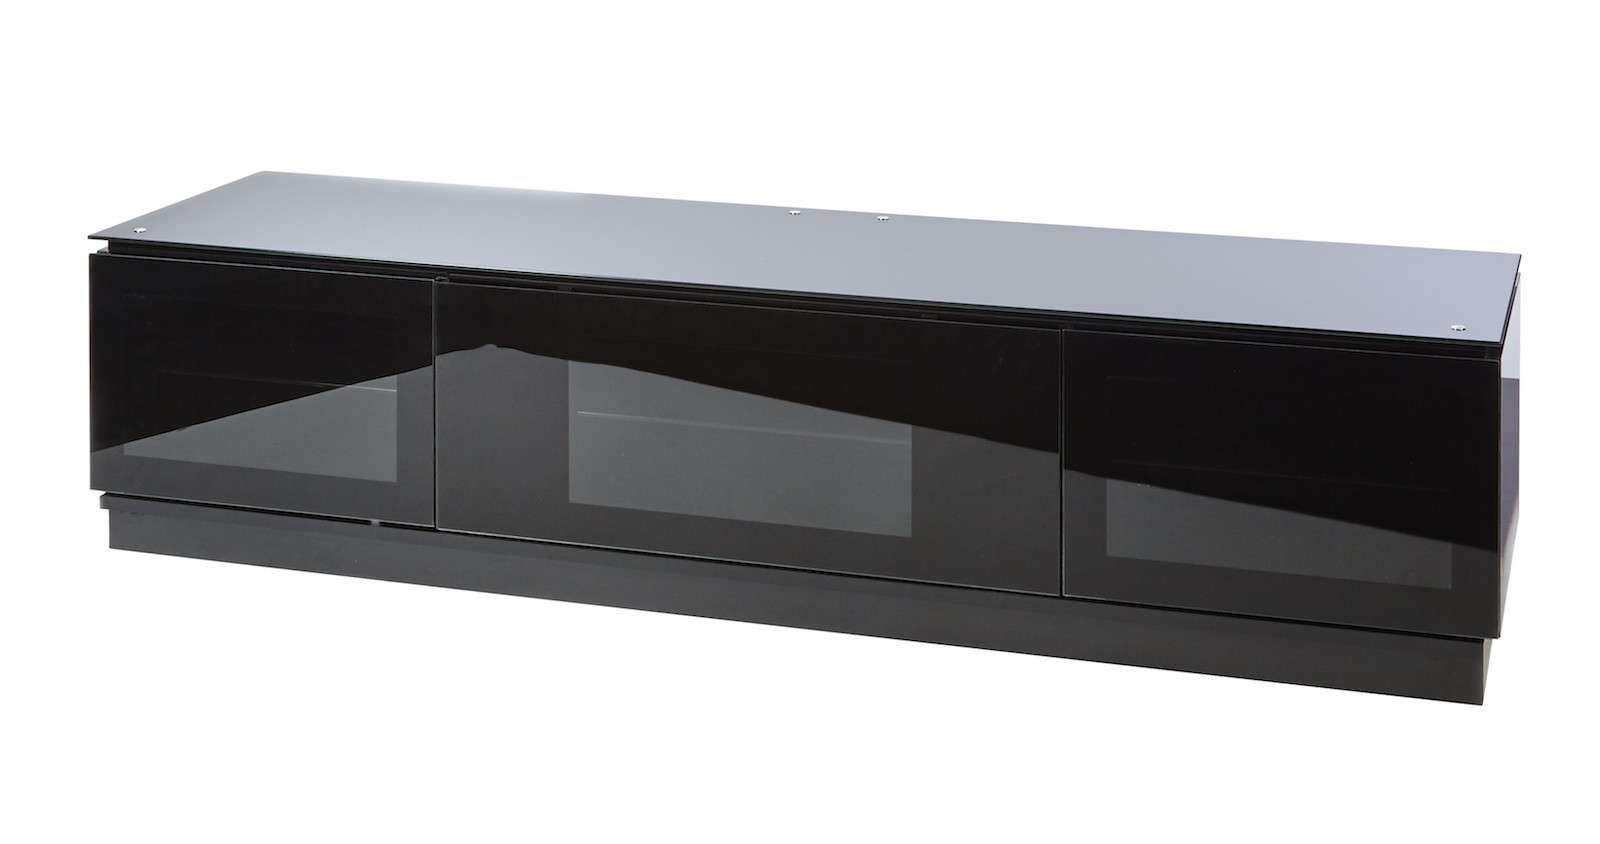 Black Gloss Tv Unit Up To 80 Inch Flat Screen Tv | Mmt D1800 With Regard To Black Gloss Tv Stands (Gallery 1 of 20)